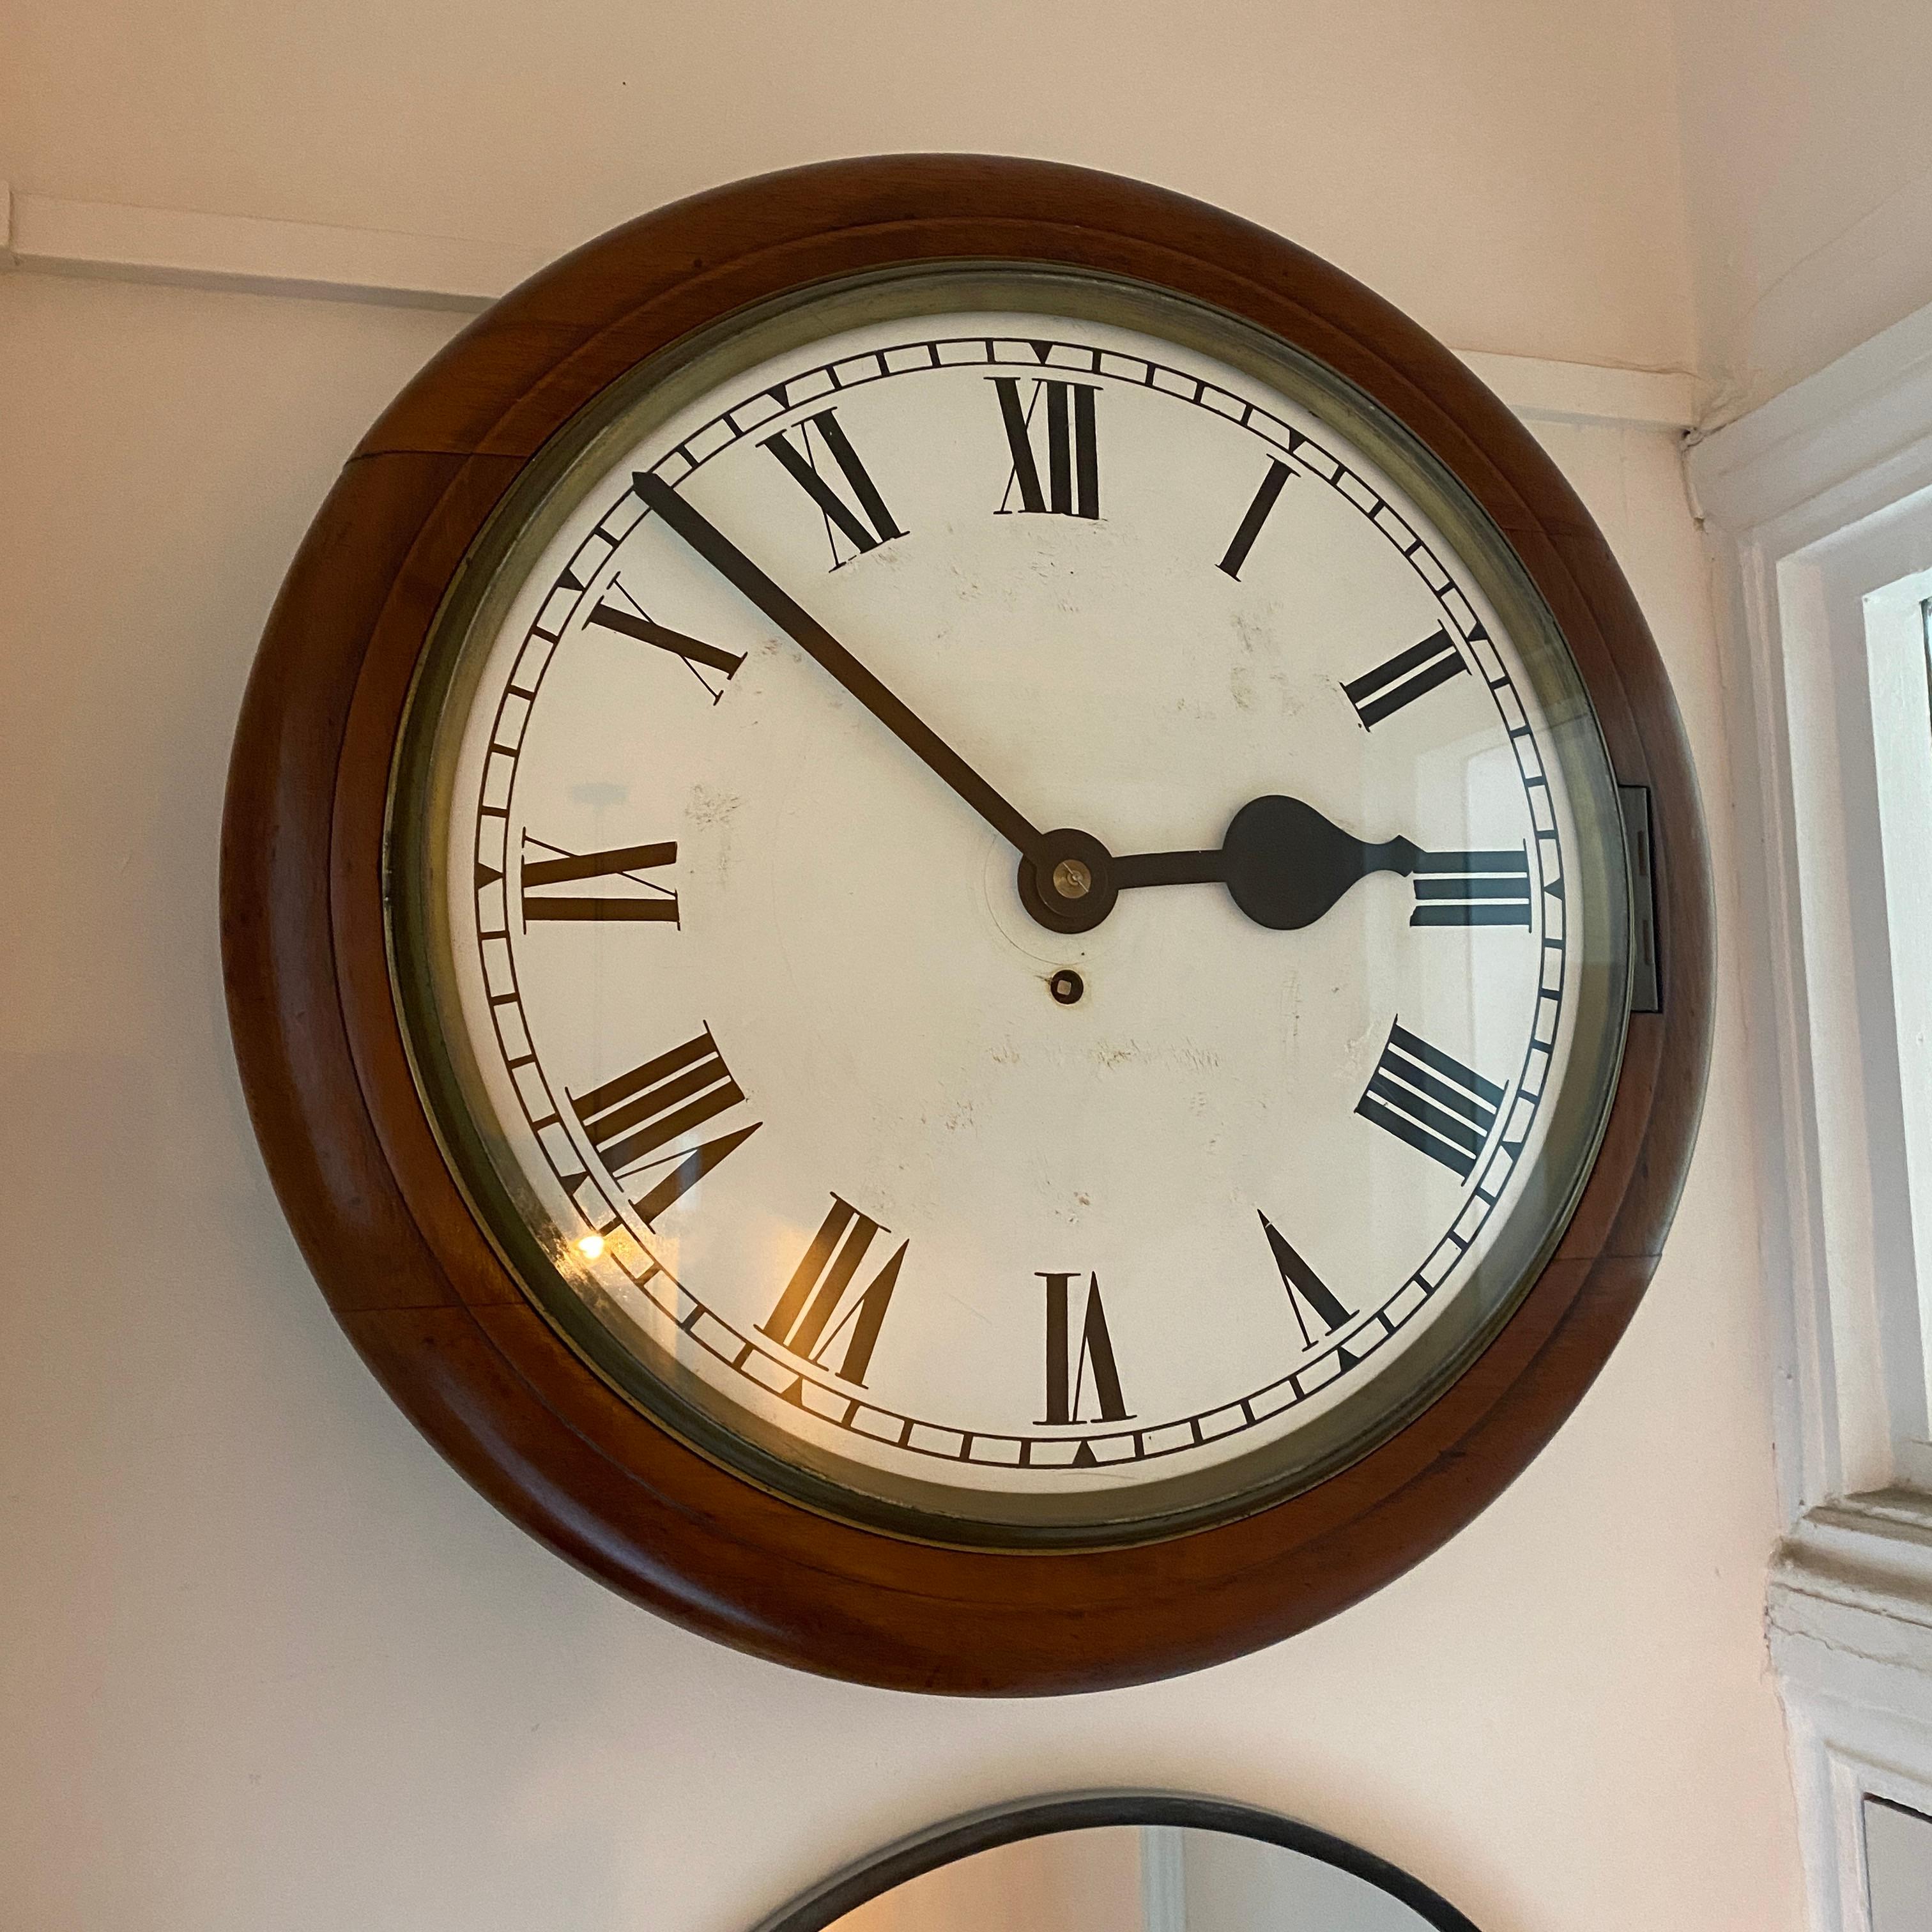 Fusee Railway Waiting Room / Commercial / boardroom / Office Clock Fusee movement - Fully Restored. This statement of a clock is it top working condition having just been fully restored, remaining 17 months of warranty. Unusual Added weight in the